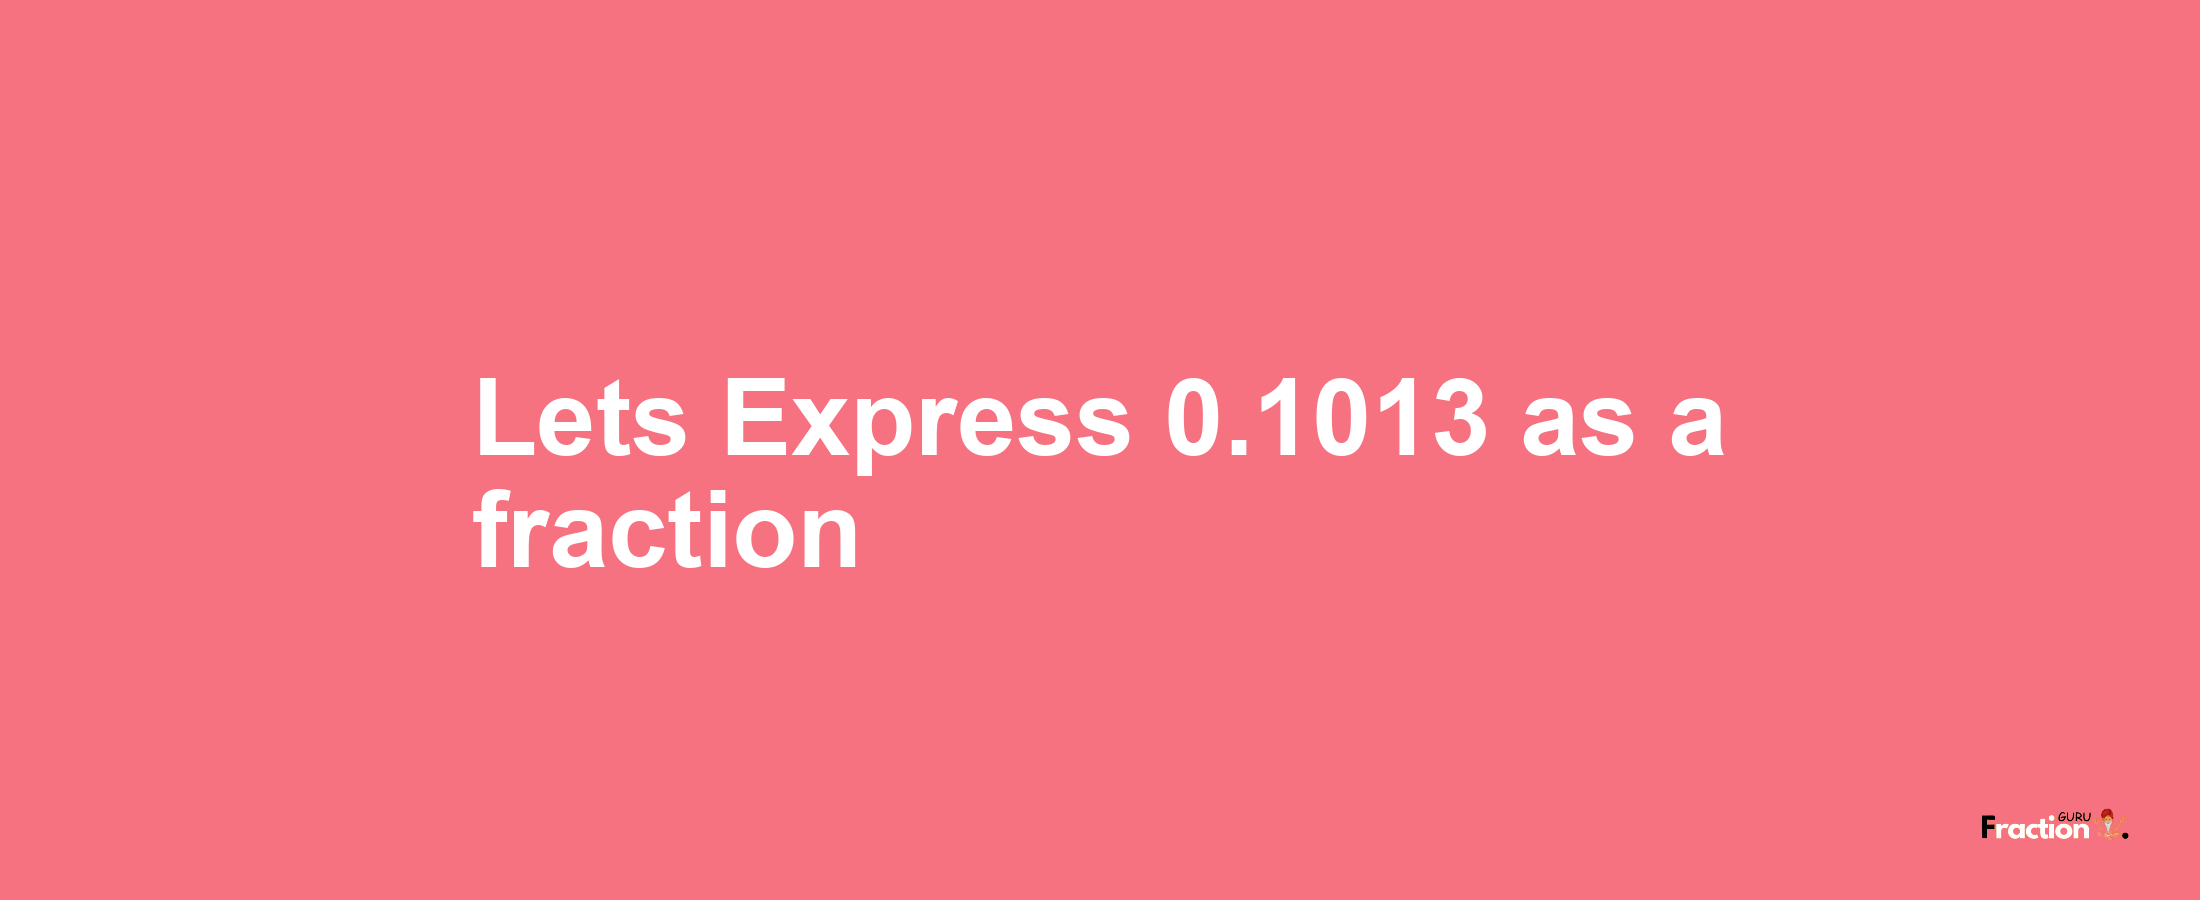 Lets Express 0.1013 as afraction